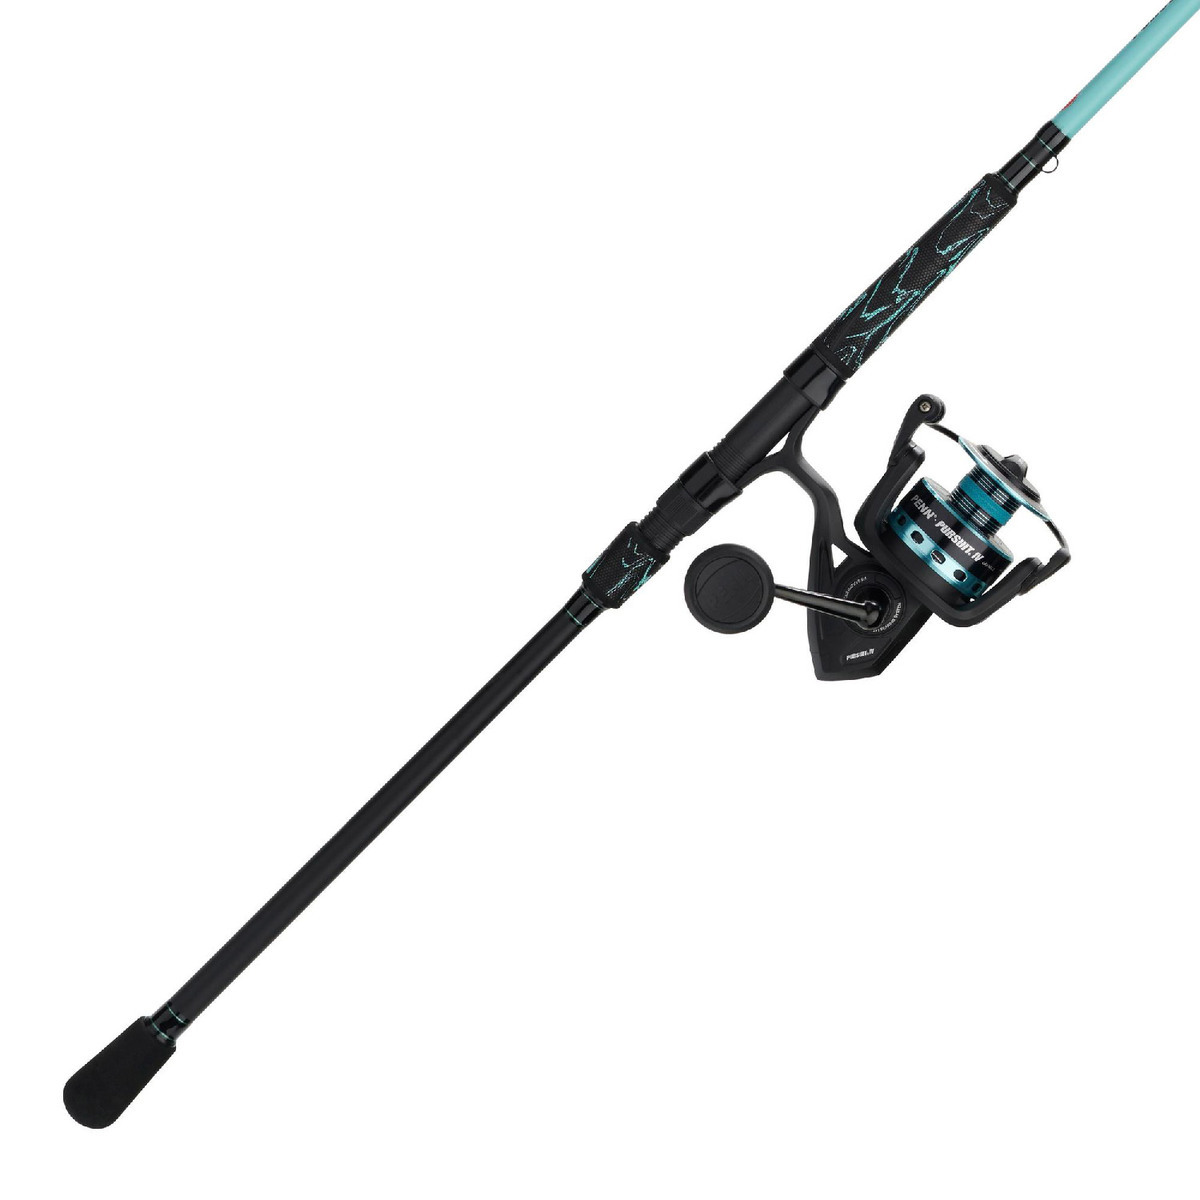 Penn 7' Pursuit IV Le Fishing Rod and Reel Spinning Combo